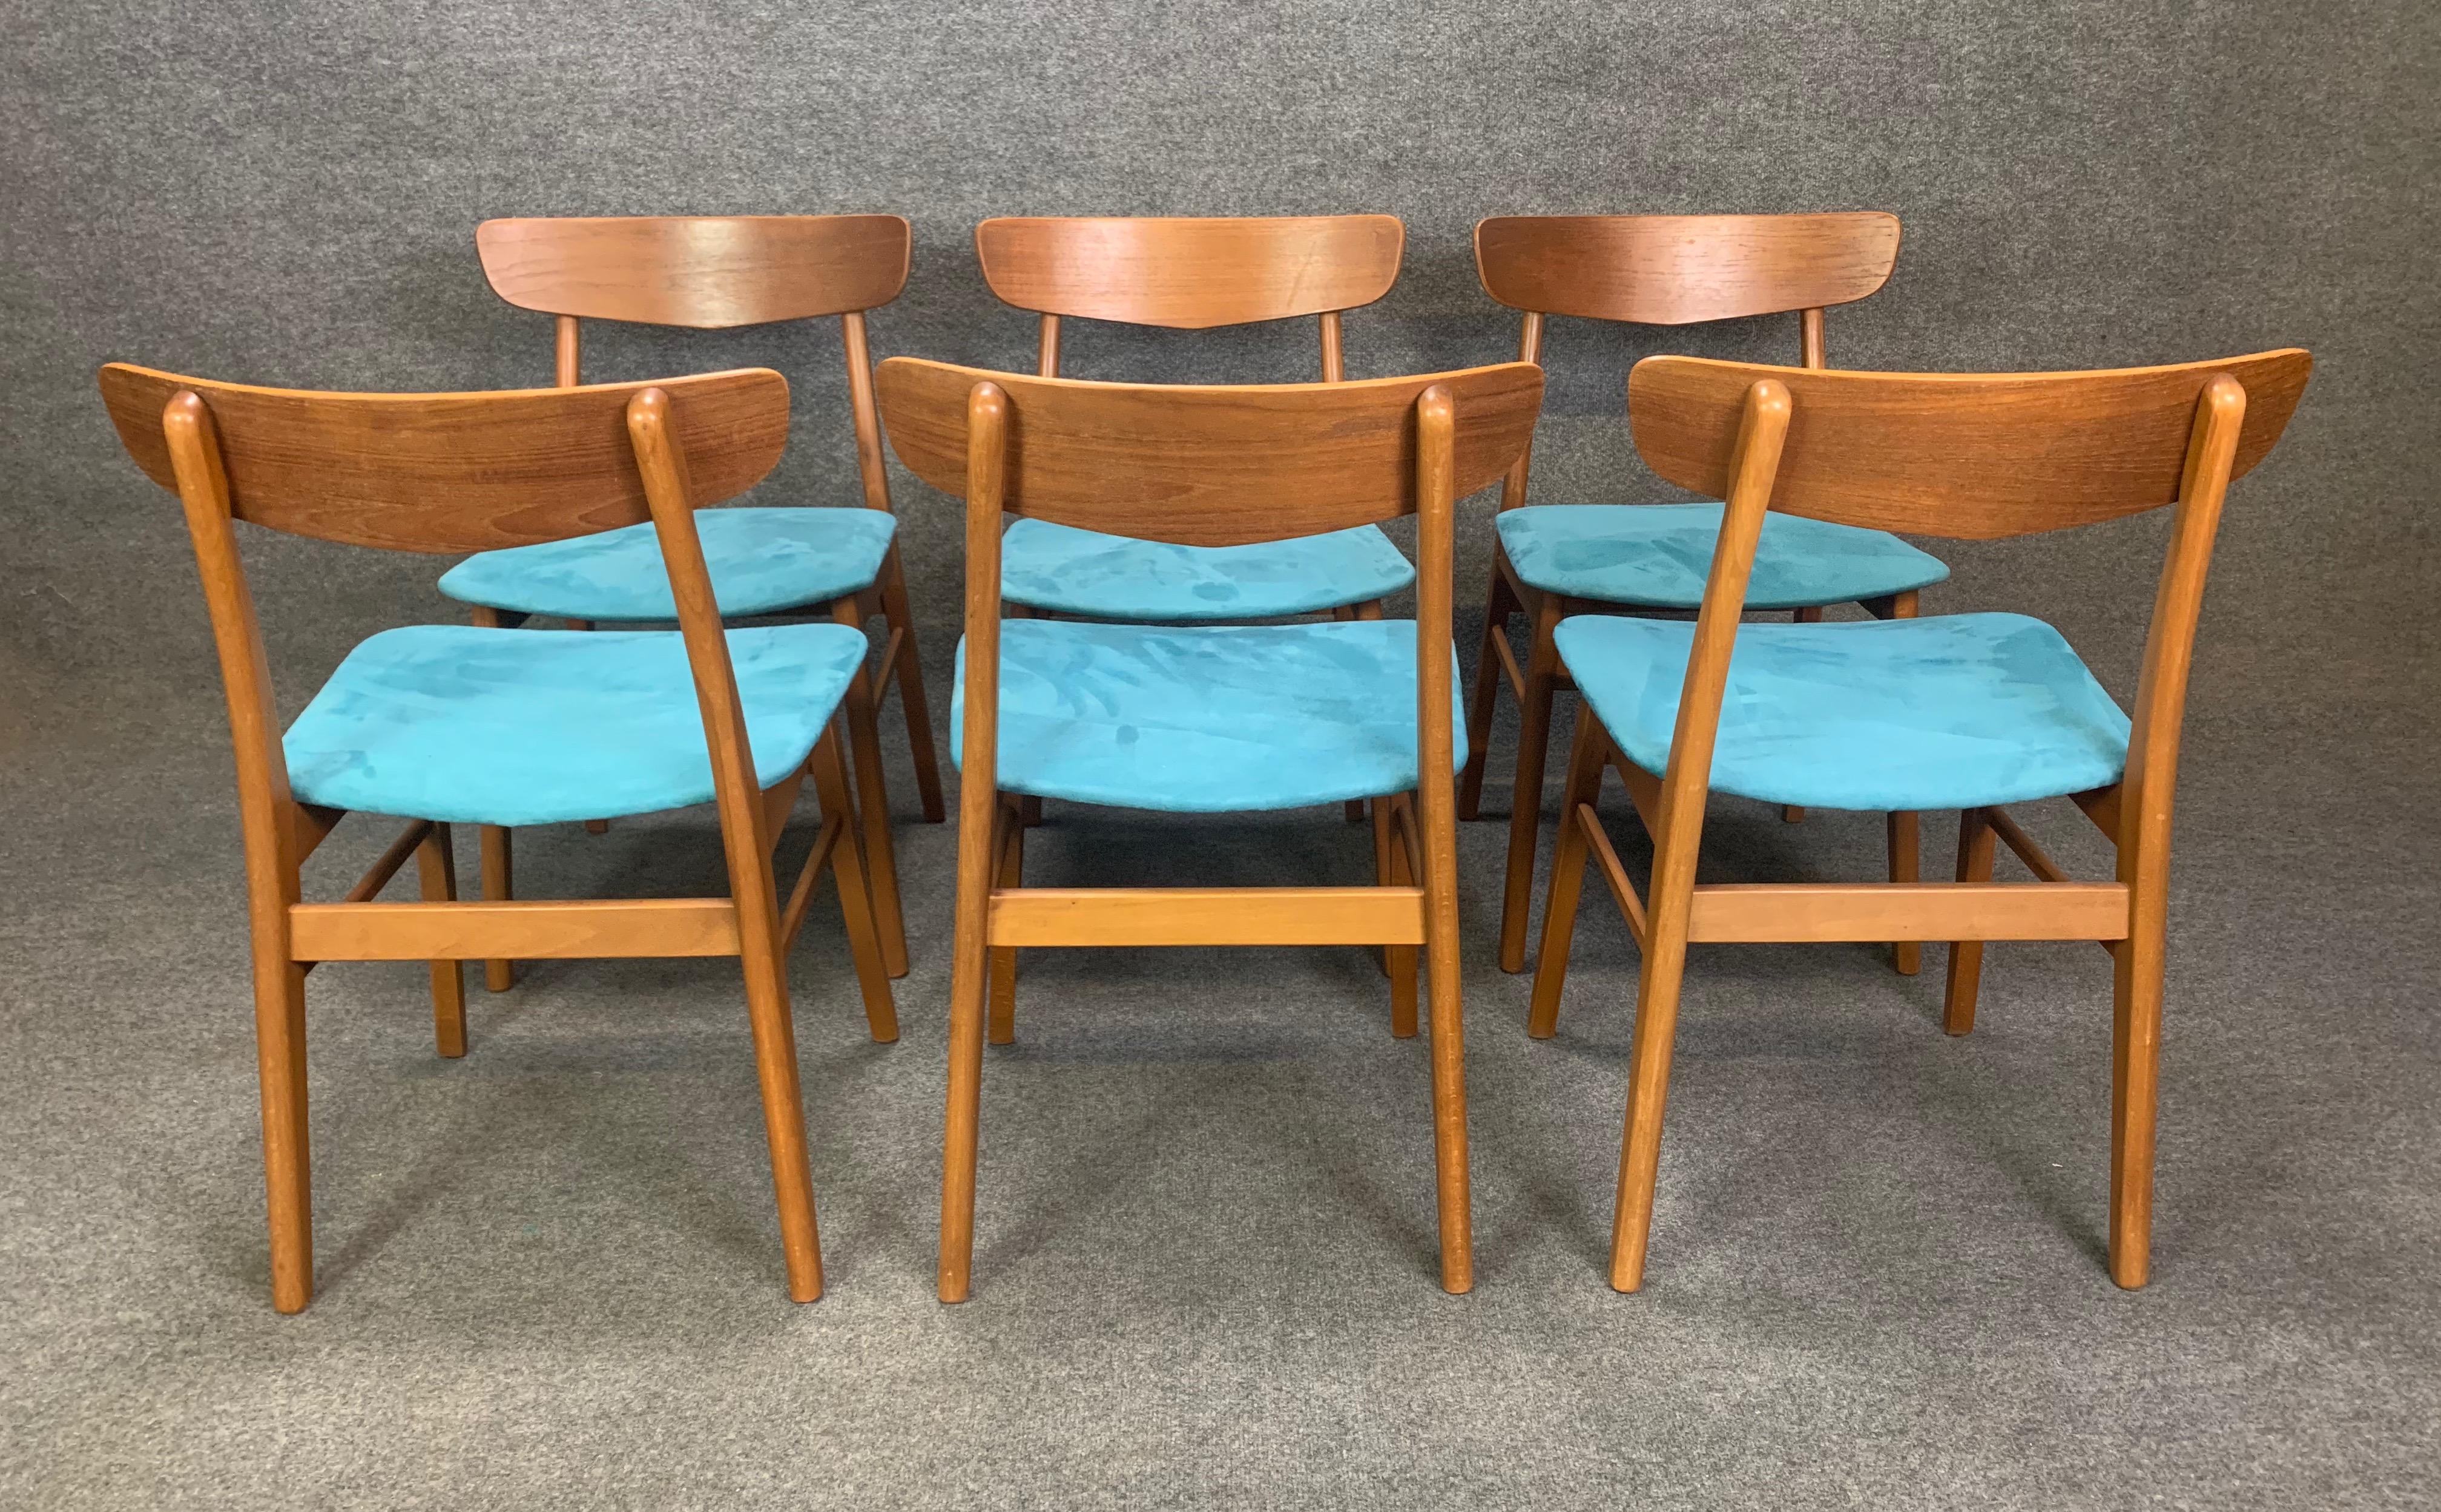 Set of Six Vintage Midcentury Danish Modern Teak Dining Chairs by Findhahls For Sale 1